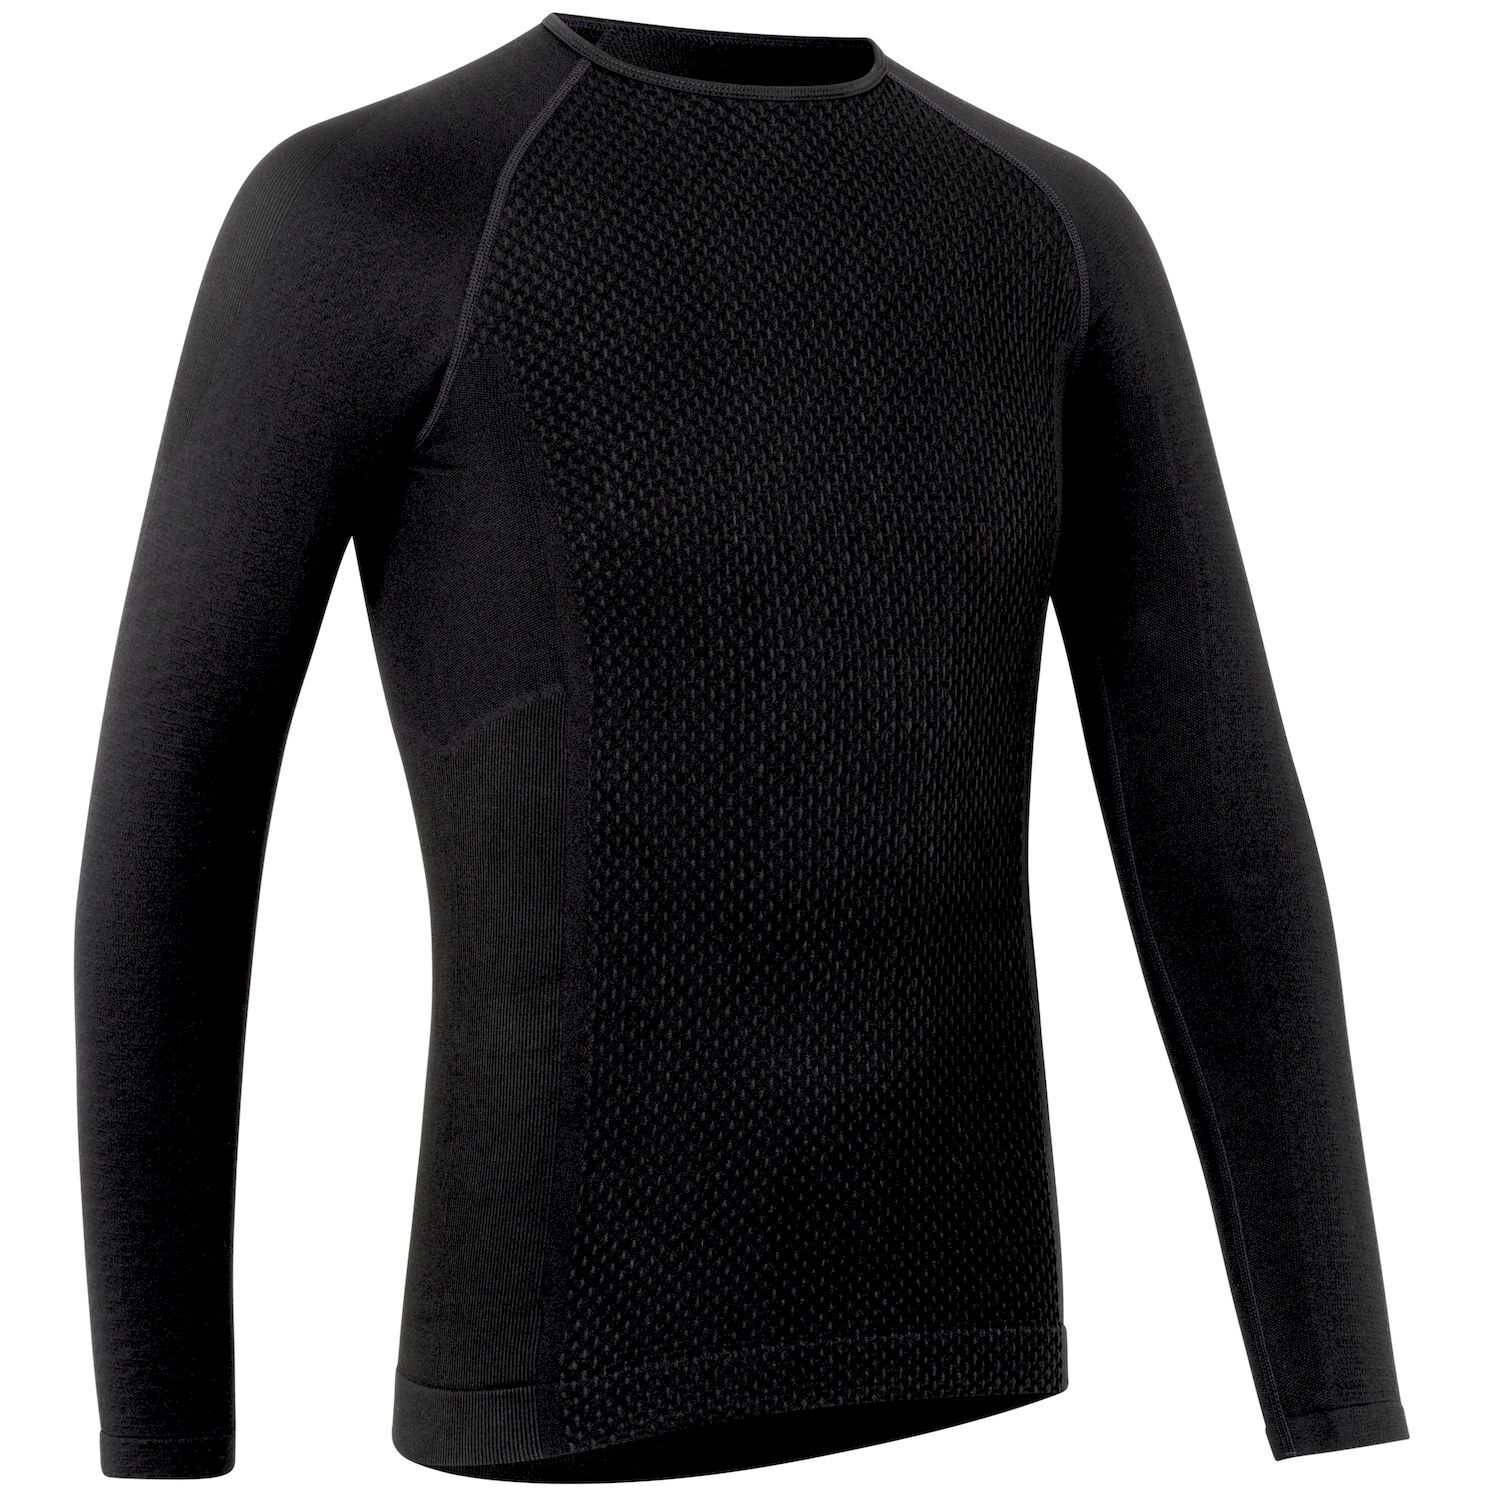 GripGrab Expert Seamless Long Sleeve Thermal Base Layer 2 - Intimo